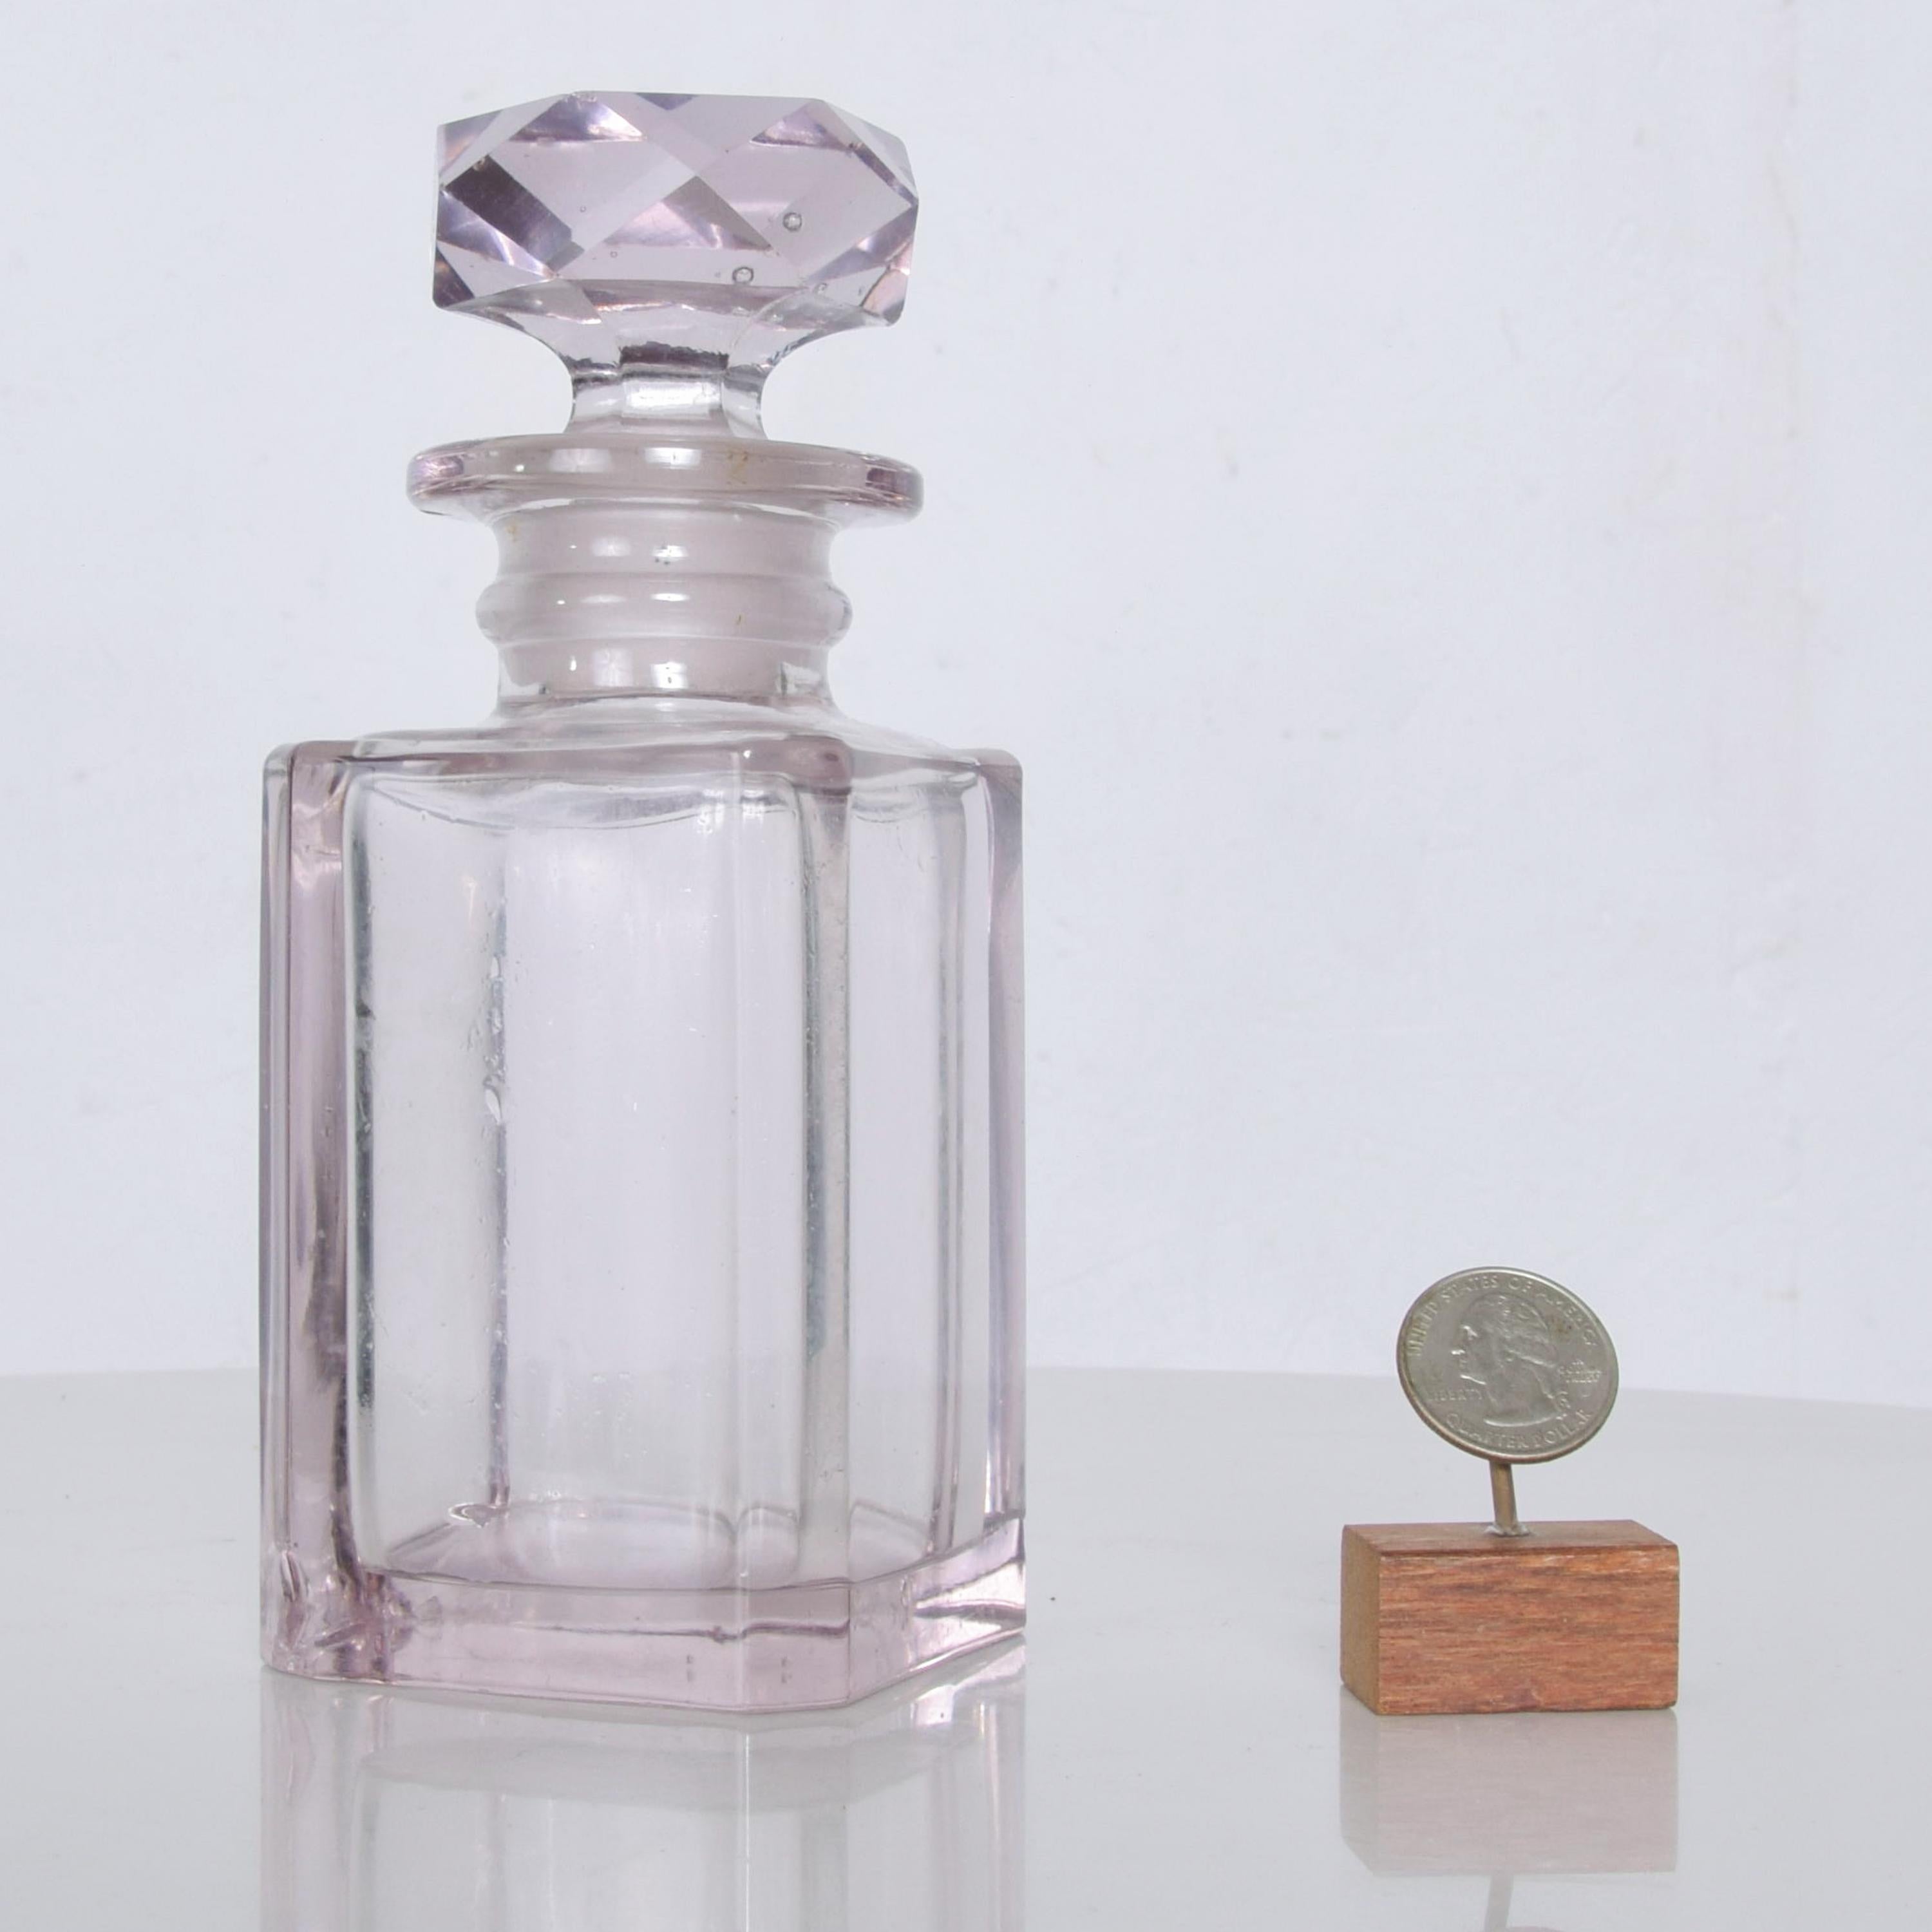 Lovely antique pale pink colored cut glass square perfume scent bottle in the style of Baccarat
Original unrestored vintage condition. With original faceted stopper. No maker stamp visible. Some nicks are present. Please review images. Dimensions: